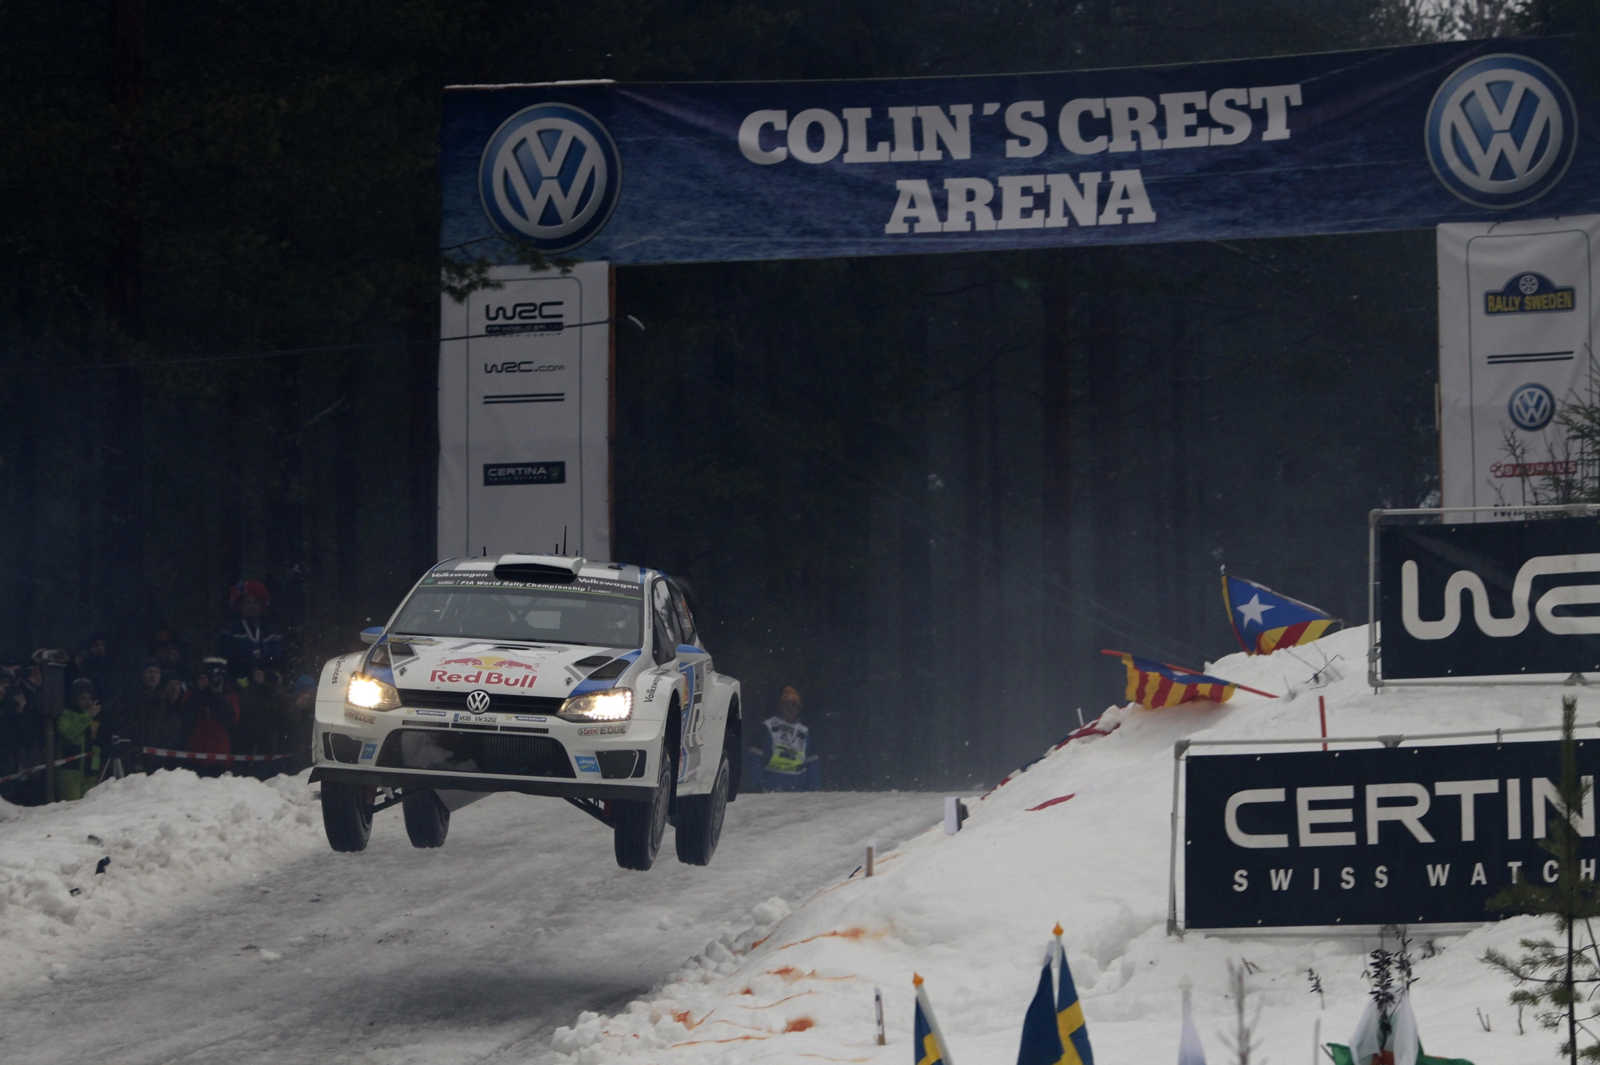 rally sweden colin crest